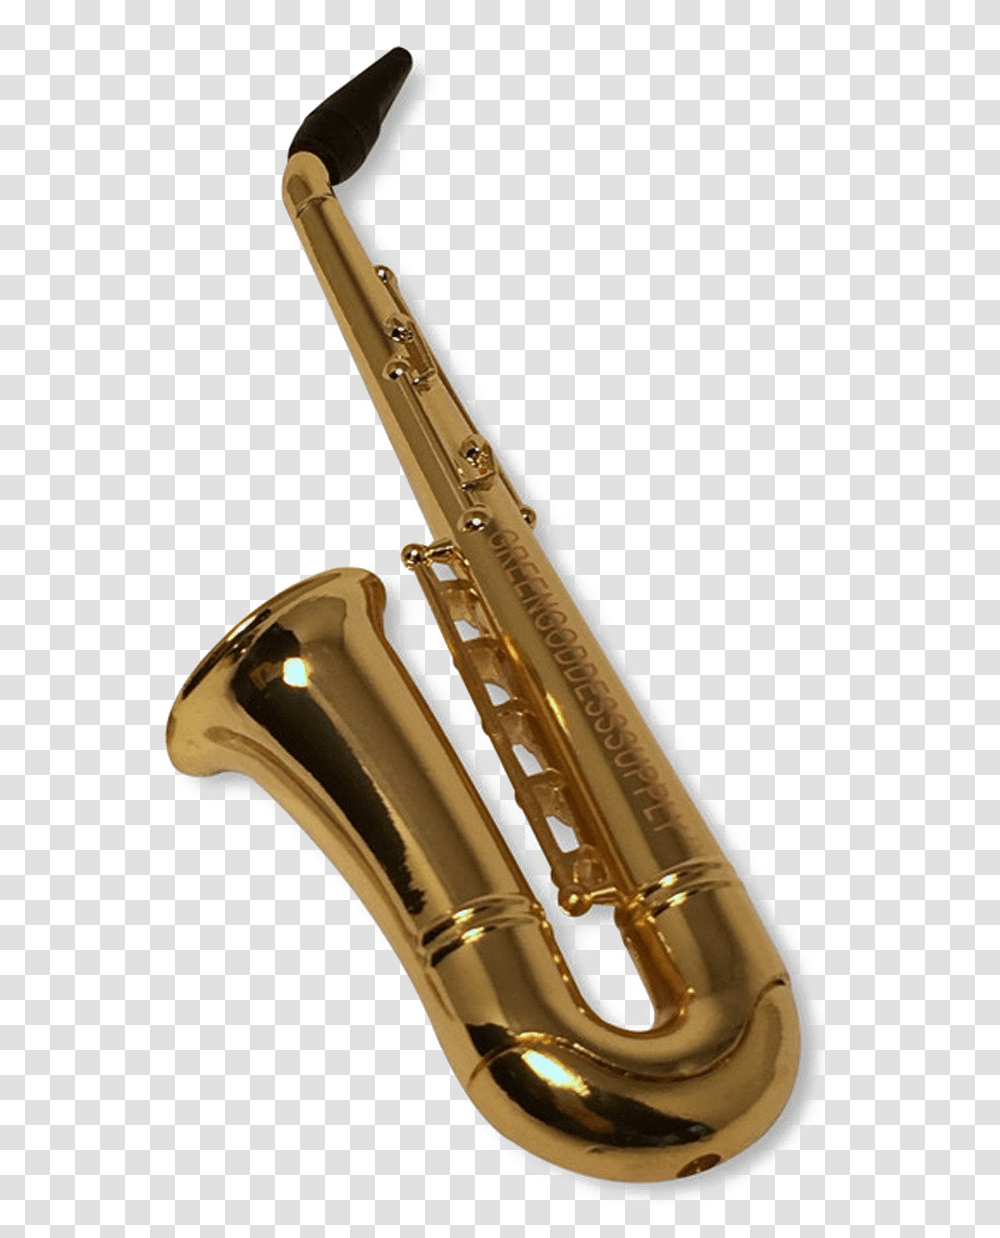 Saxophone Image Background Background Saxophone, Musical Instrument, Leisure Activities, Brass Section Transparent Png